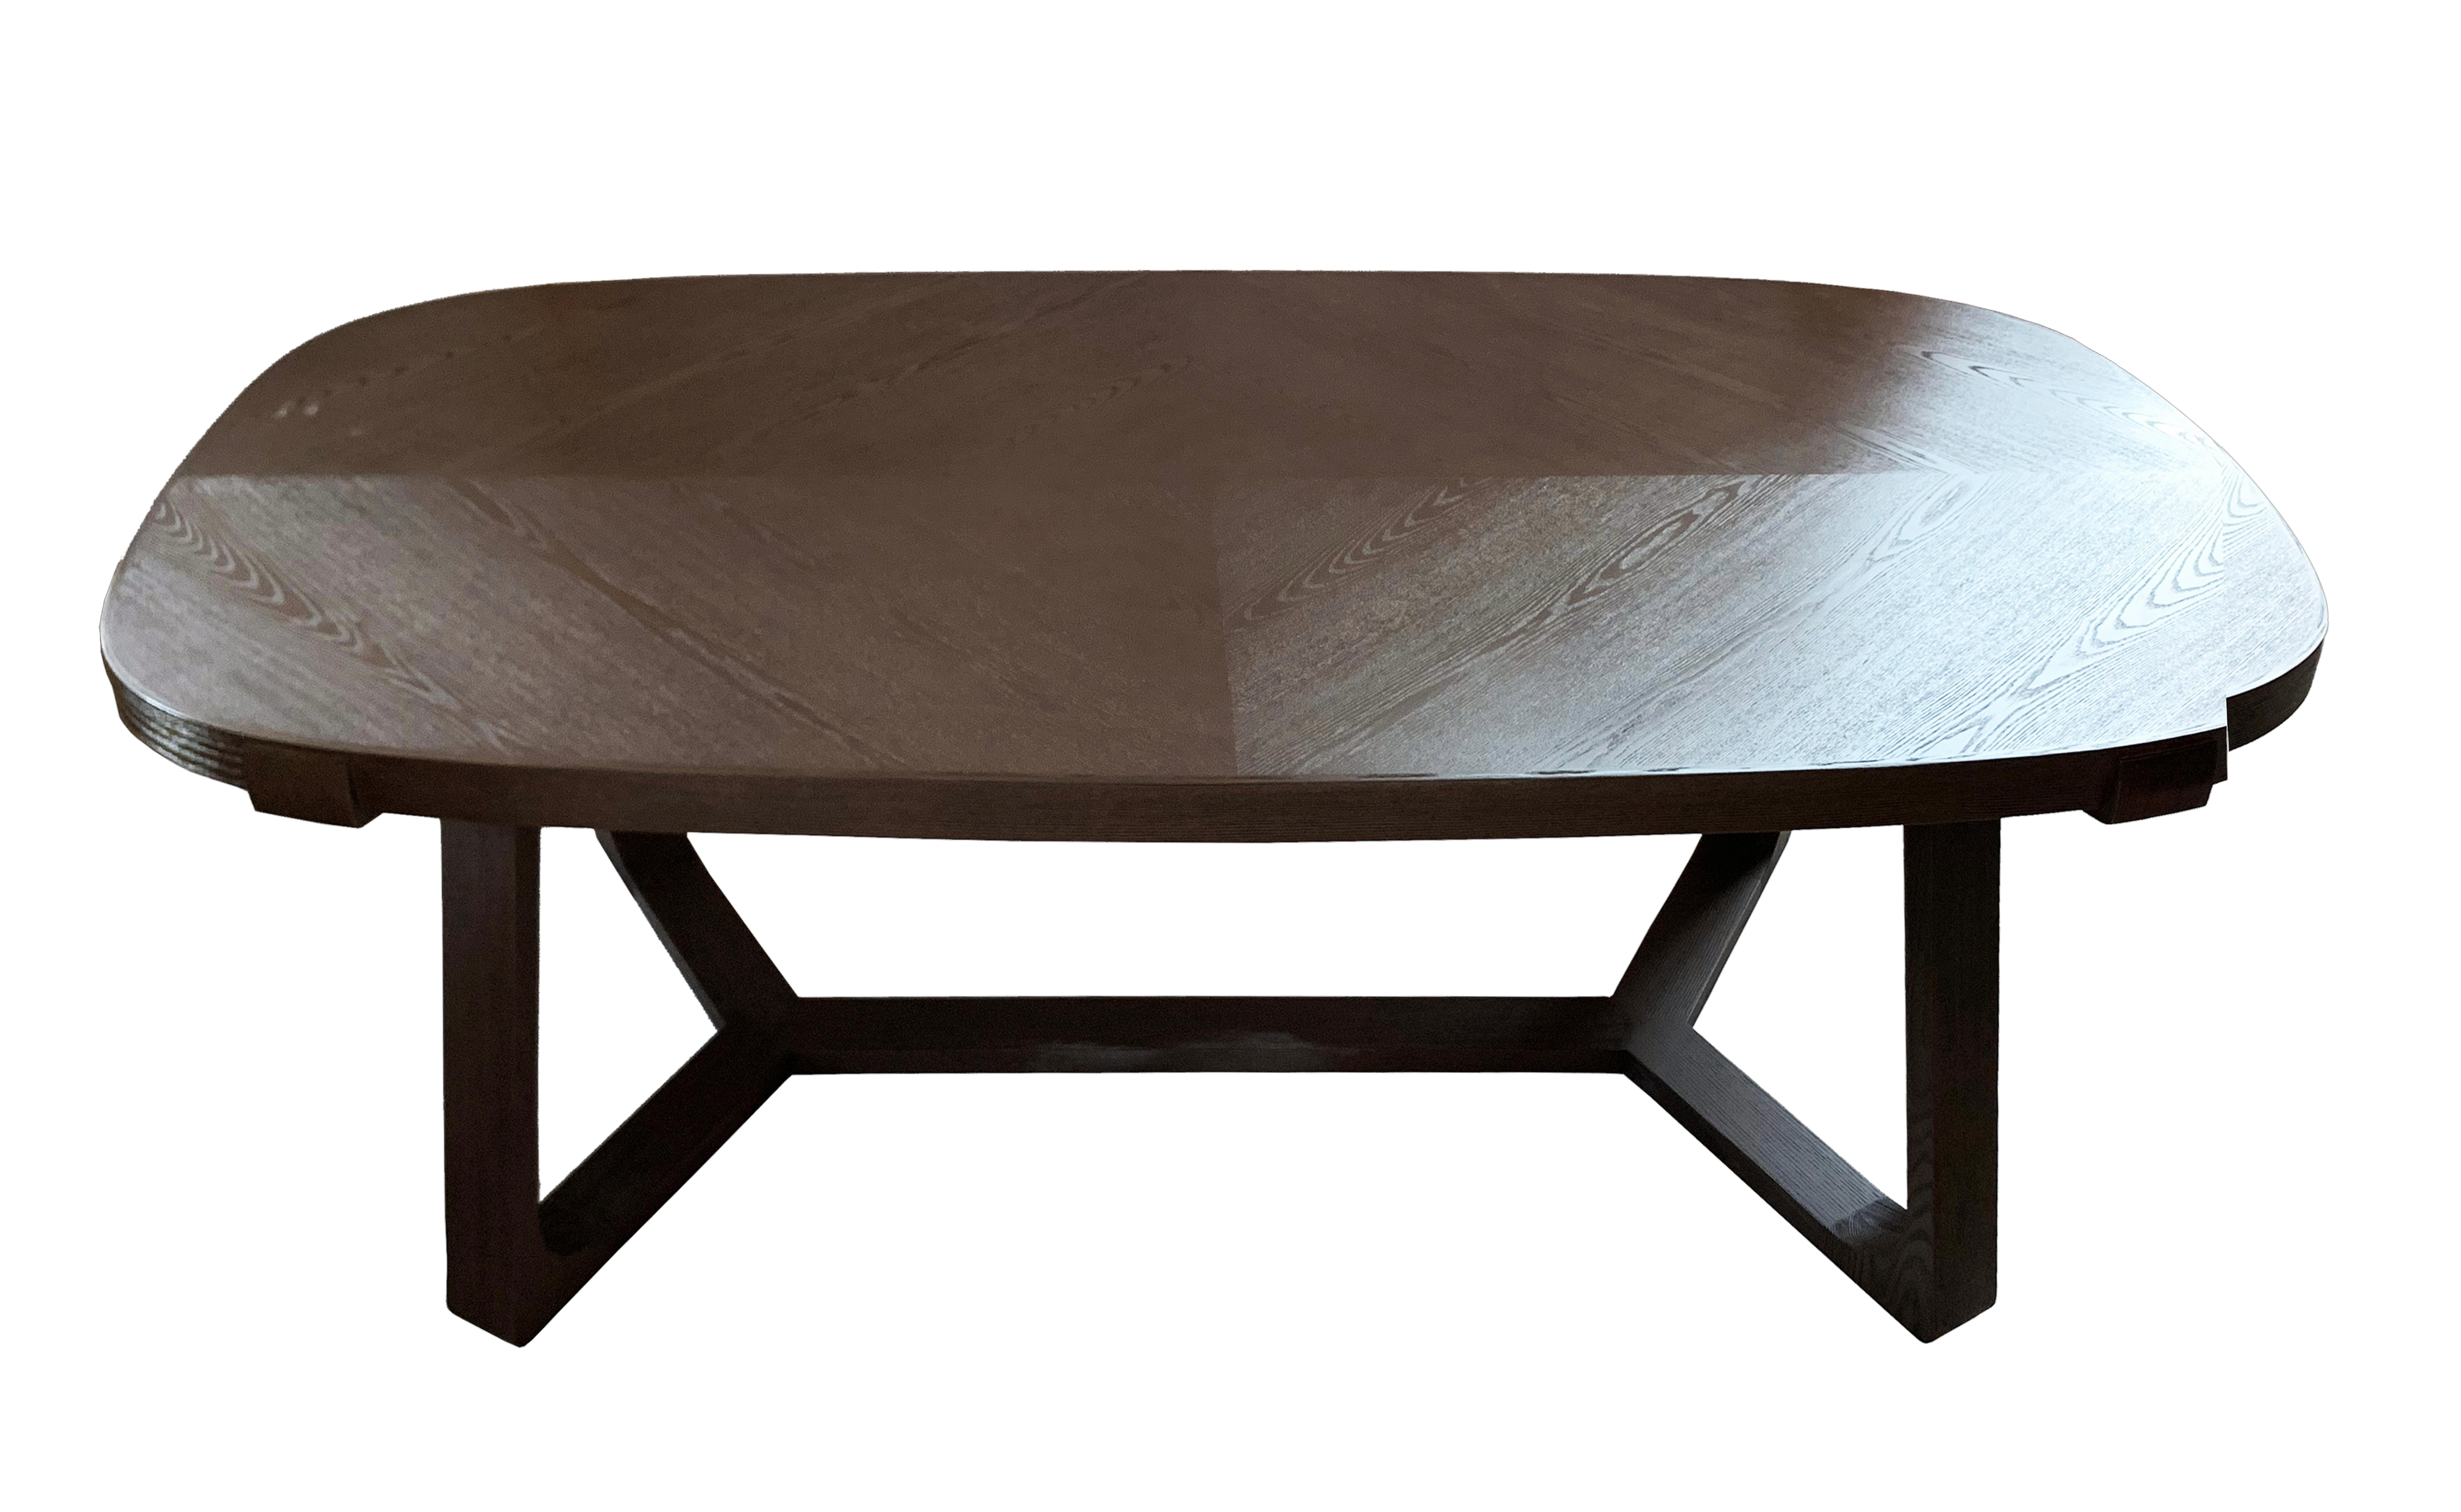 Wooden oval dining table, solid oak legs, oak veneer top.
Customisable size upon request.
Available in grey oak color too, upon request.
Suitable for 8 people.

Description: Oval Dining Table 240
Color: Brown
Size: 240 x 110 x 73H cm
Material: